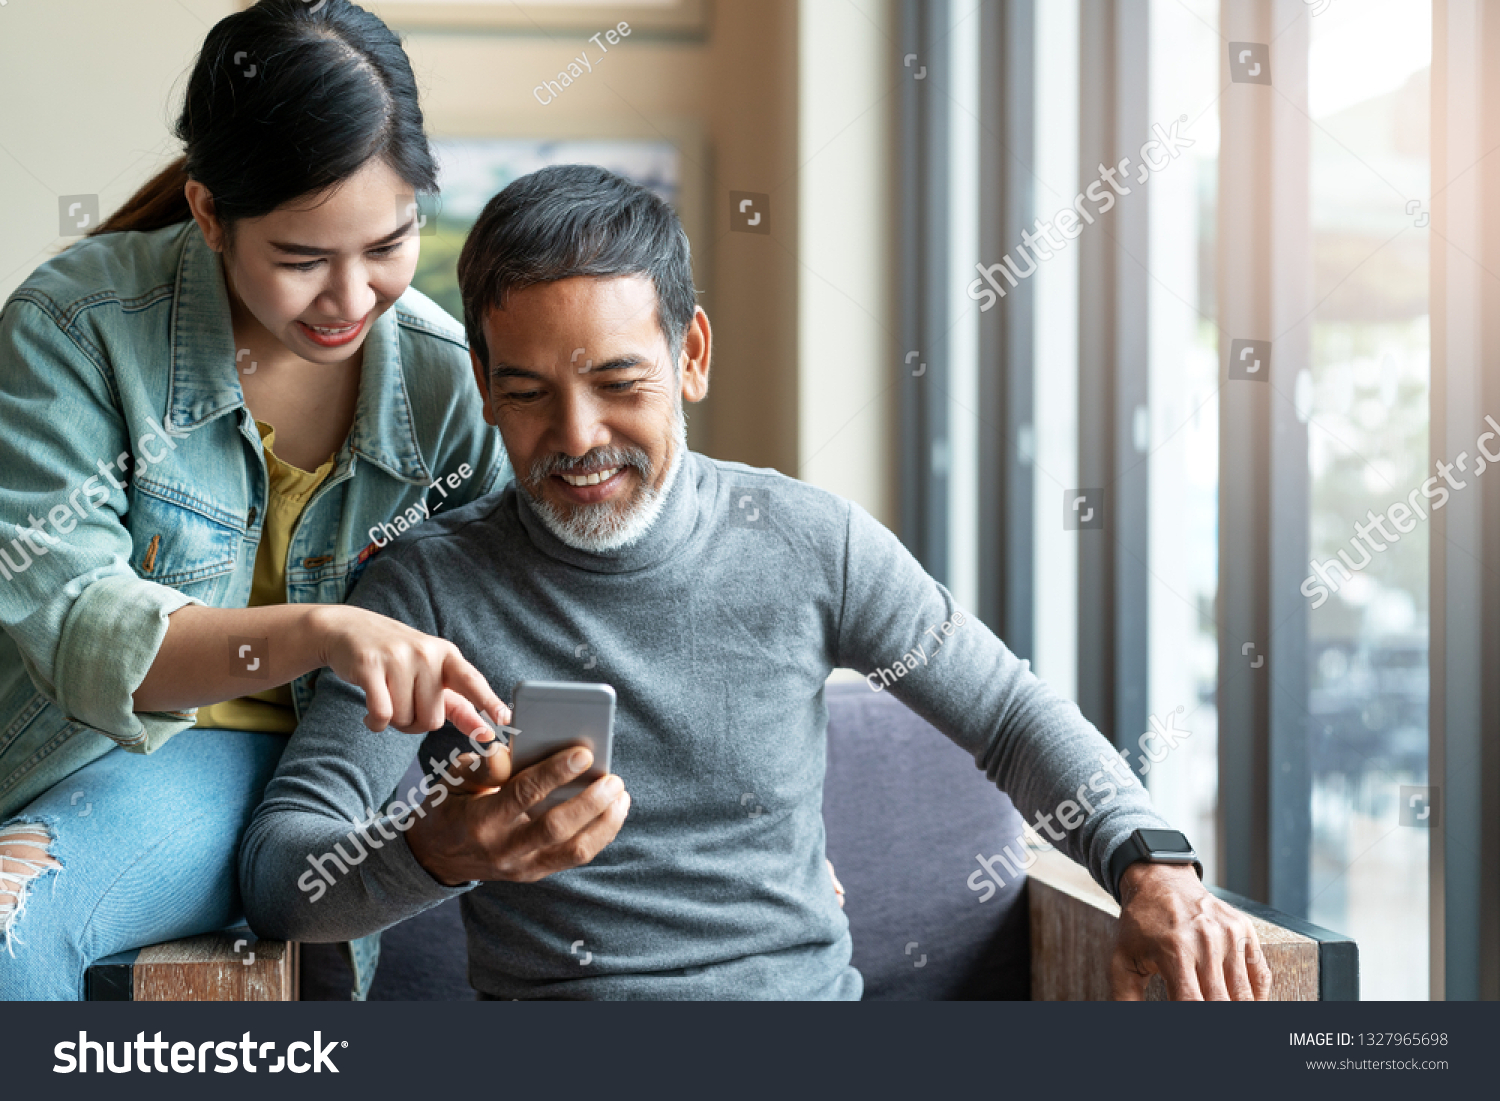 Attractive mature asian man with white stylish short beard looking at smartphone computer with teenage eye glasses hipster woman in cafe. Teaching internet online or wifi technology concept #1327965698